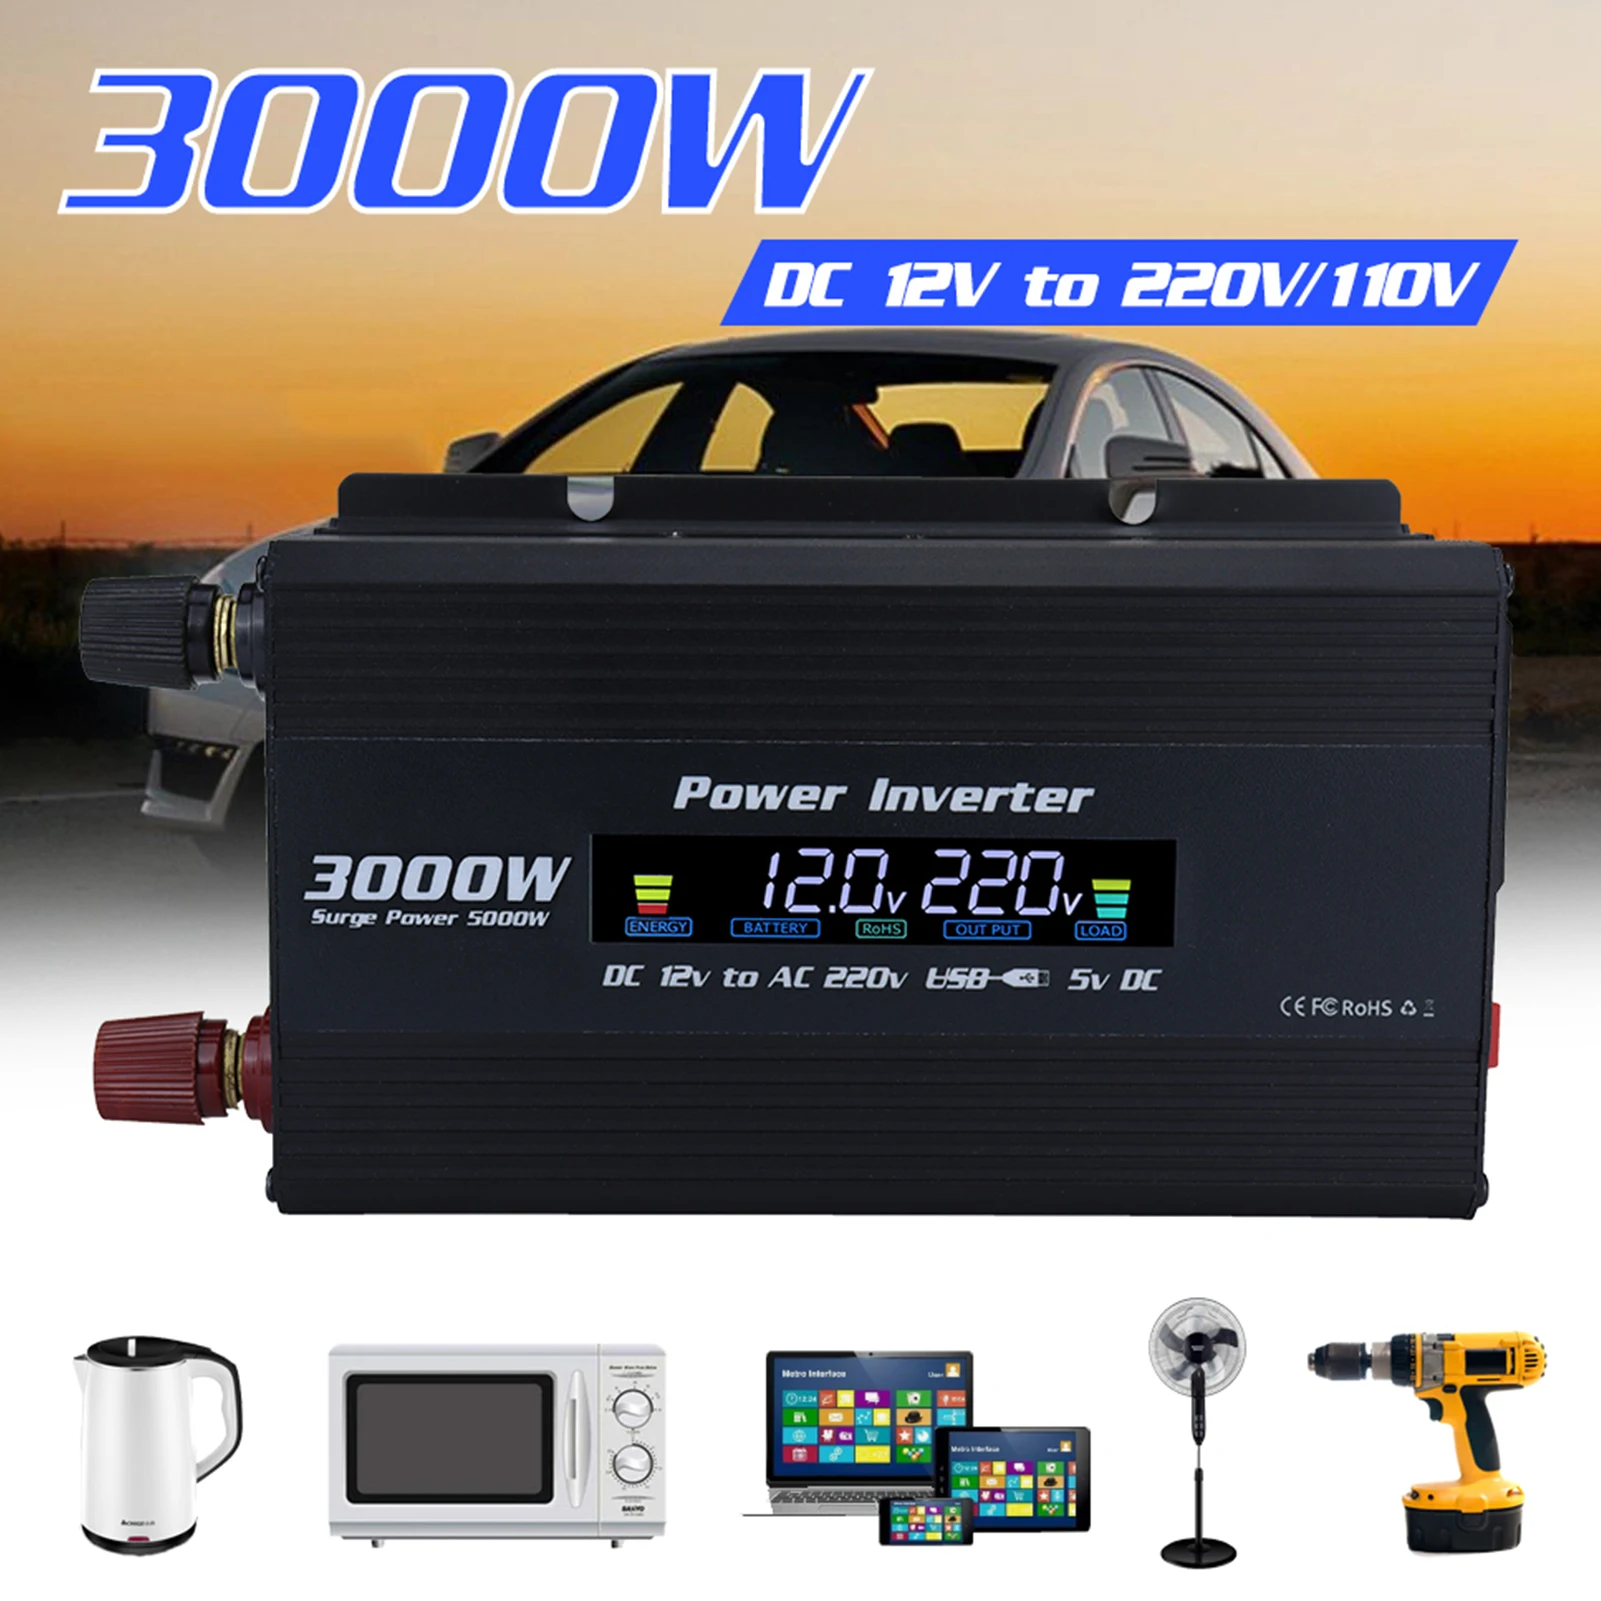 

Auto Power Inverters Modified Sine Waves 5000W Inverter 5000W Converter With Compact Design And LED Display USB Car Cigarettes